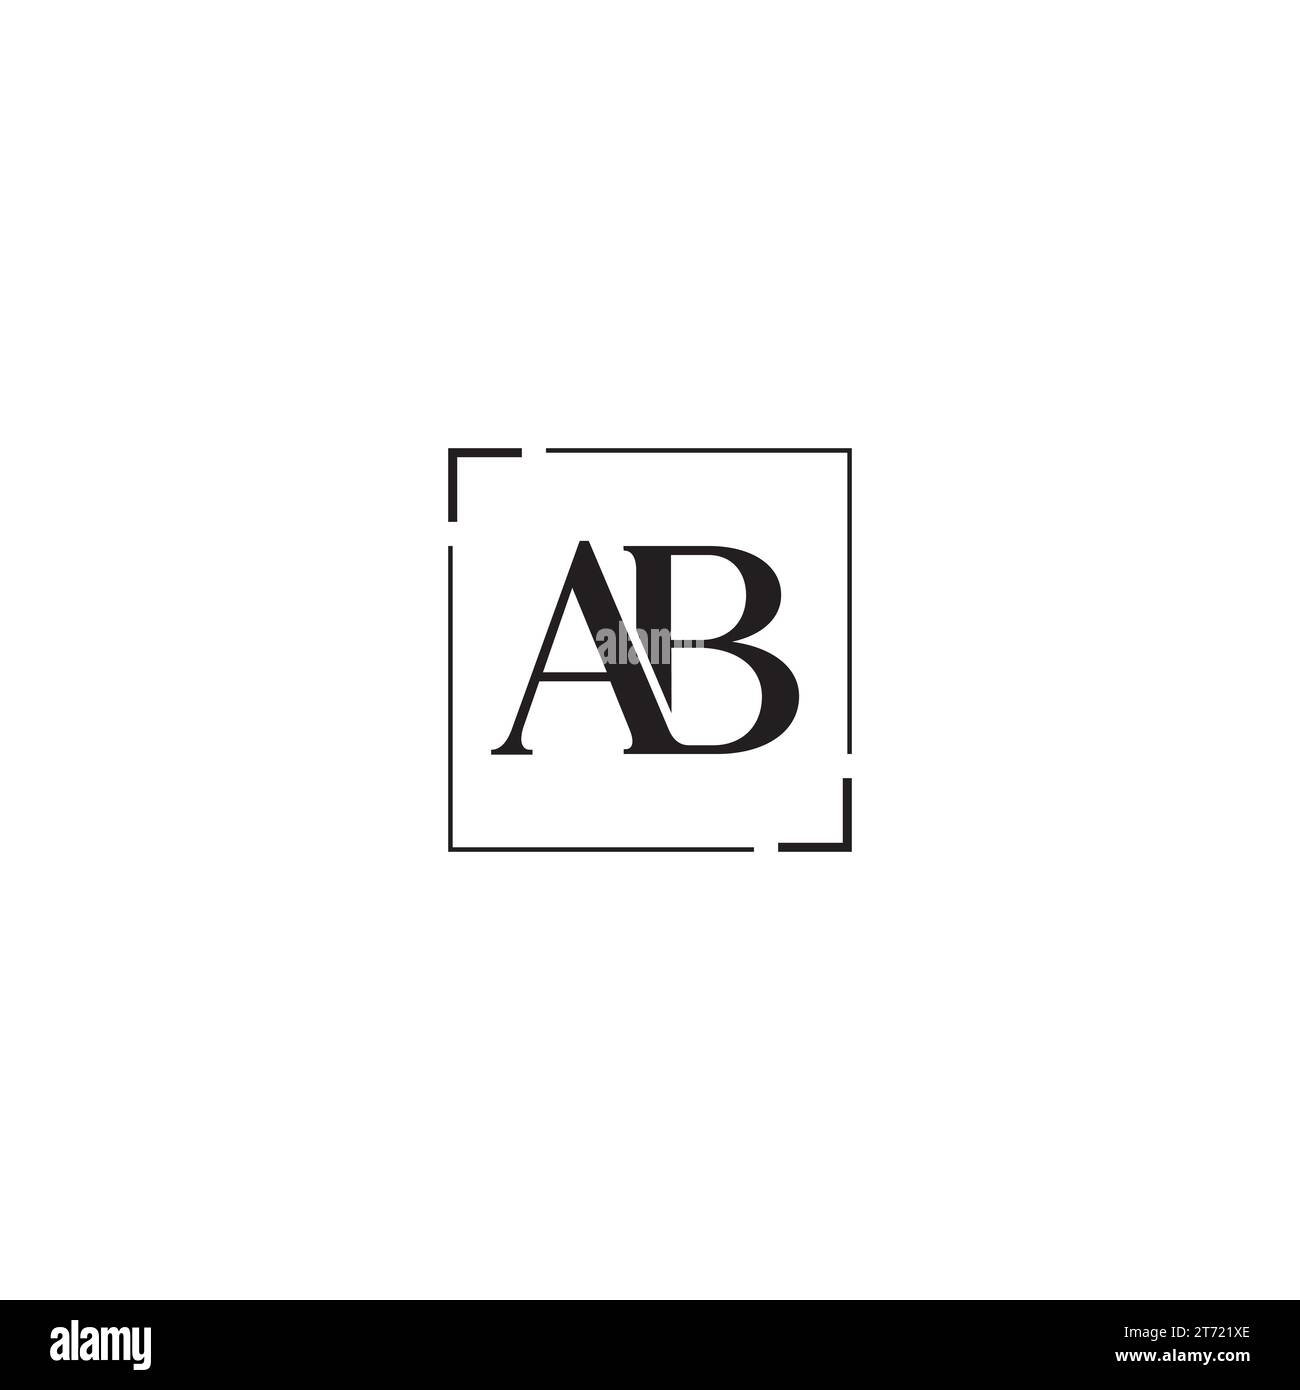 Letter AB and Square logo or icon design Stock Vector